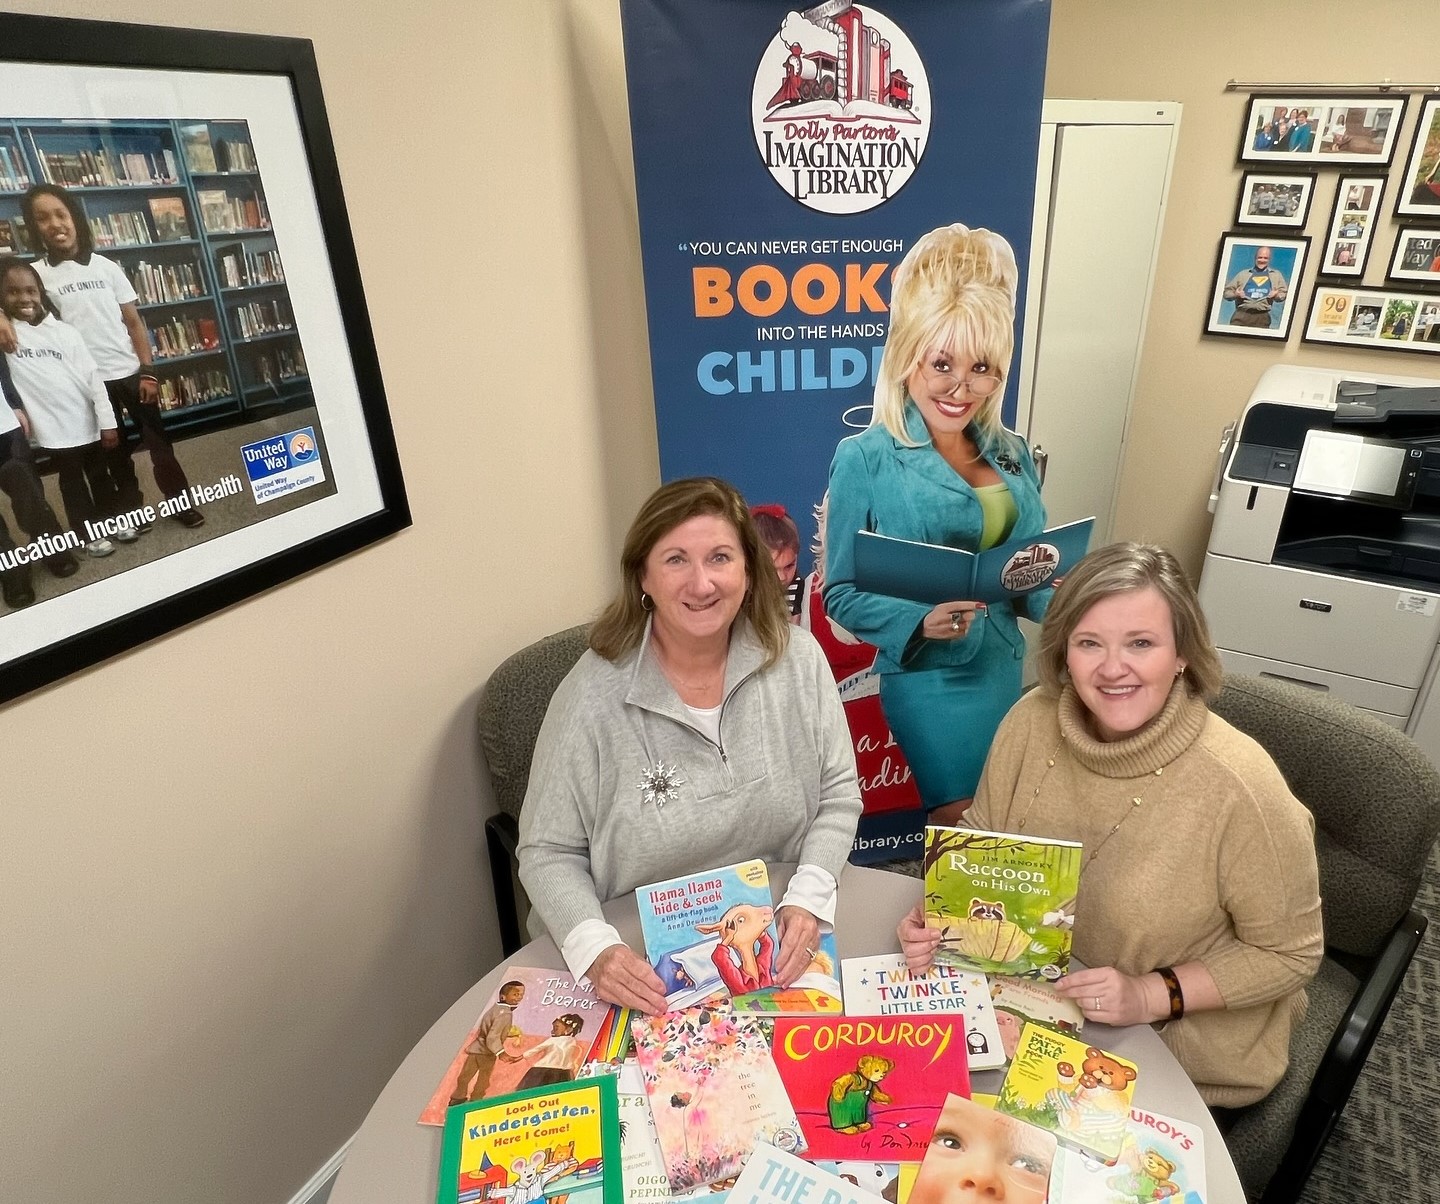 Two white women are seated at round table covered with colorful children's books. There is a standup banner behind them featuring an image of Dolly Parton.